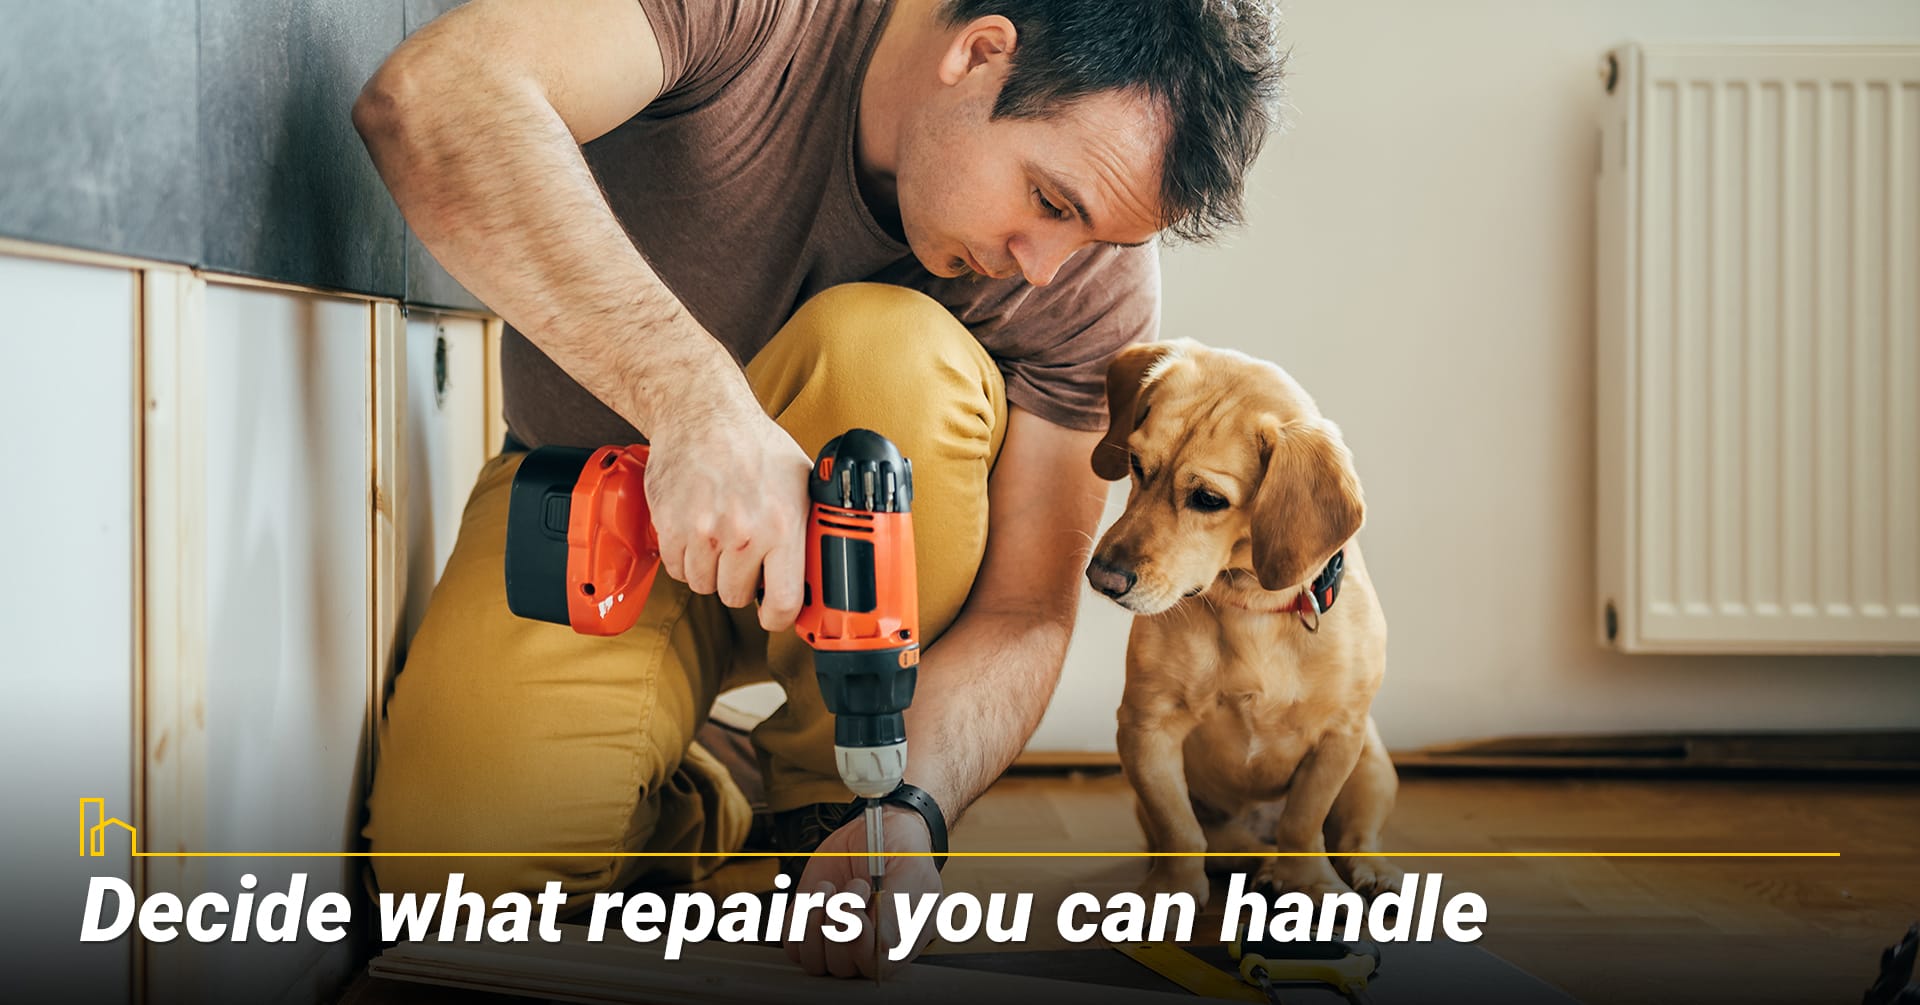 Decide what repairs you can handle.